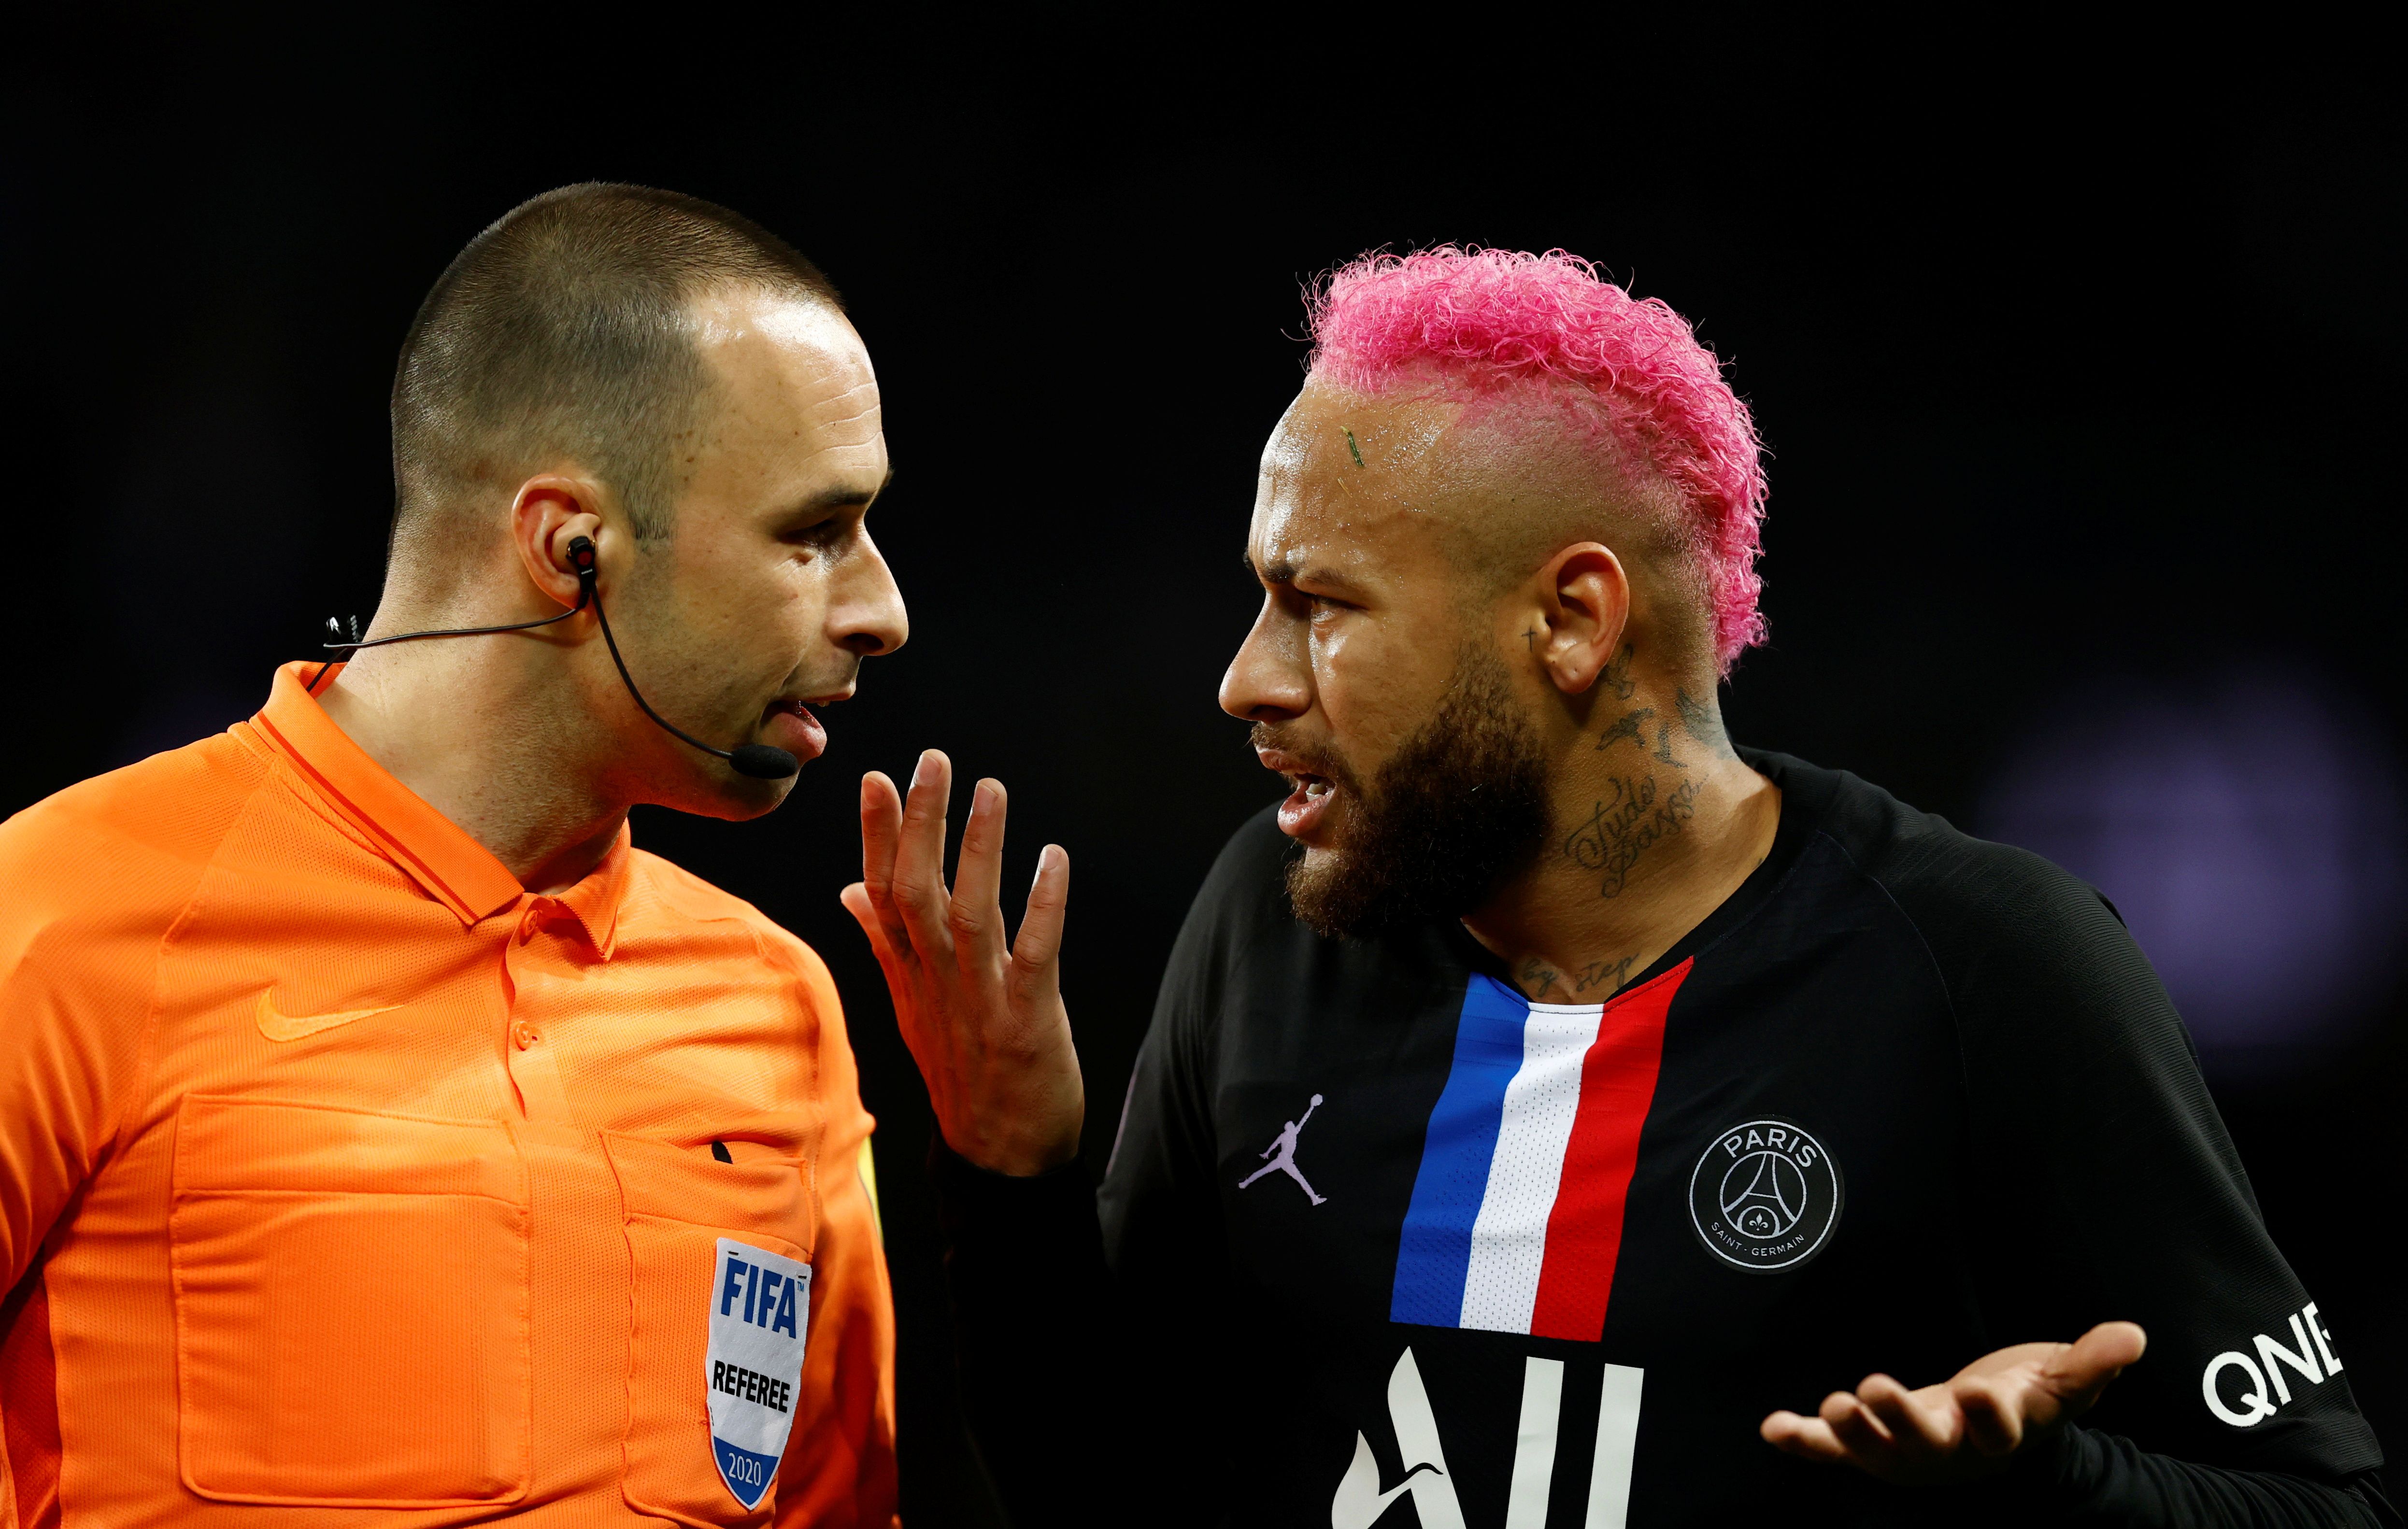 Neymar argues with the referee in PSG vs Montpellier